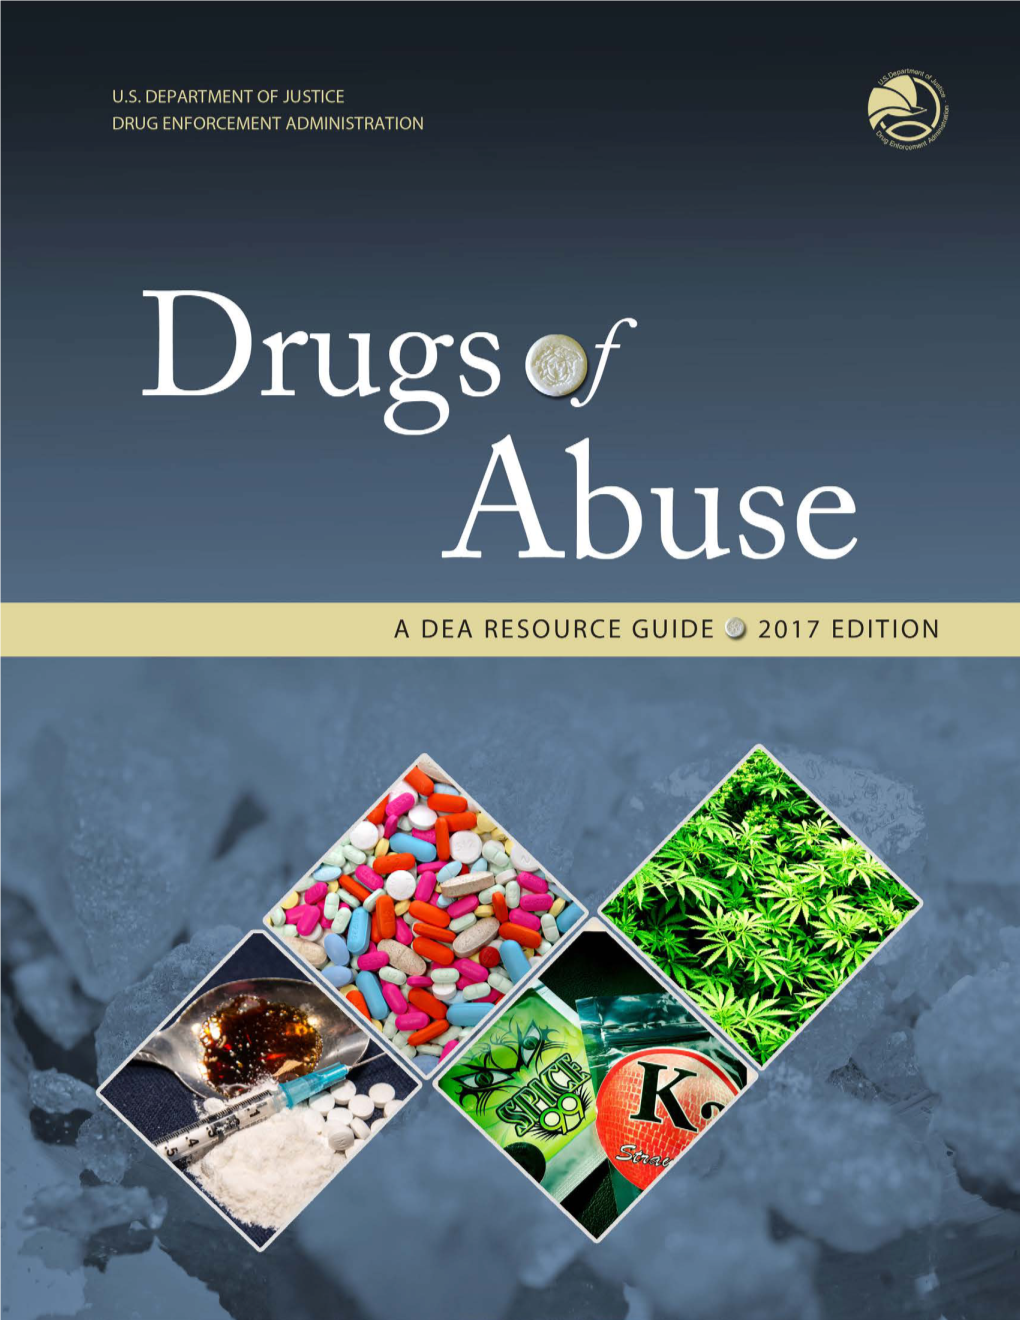 Drugs of Abuse (2017 Edition)